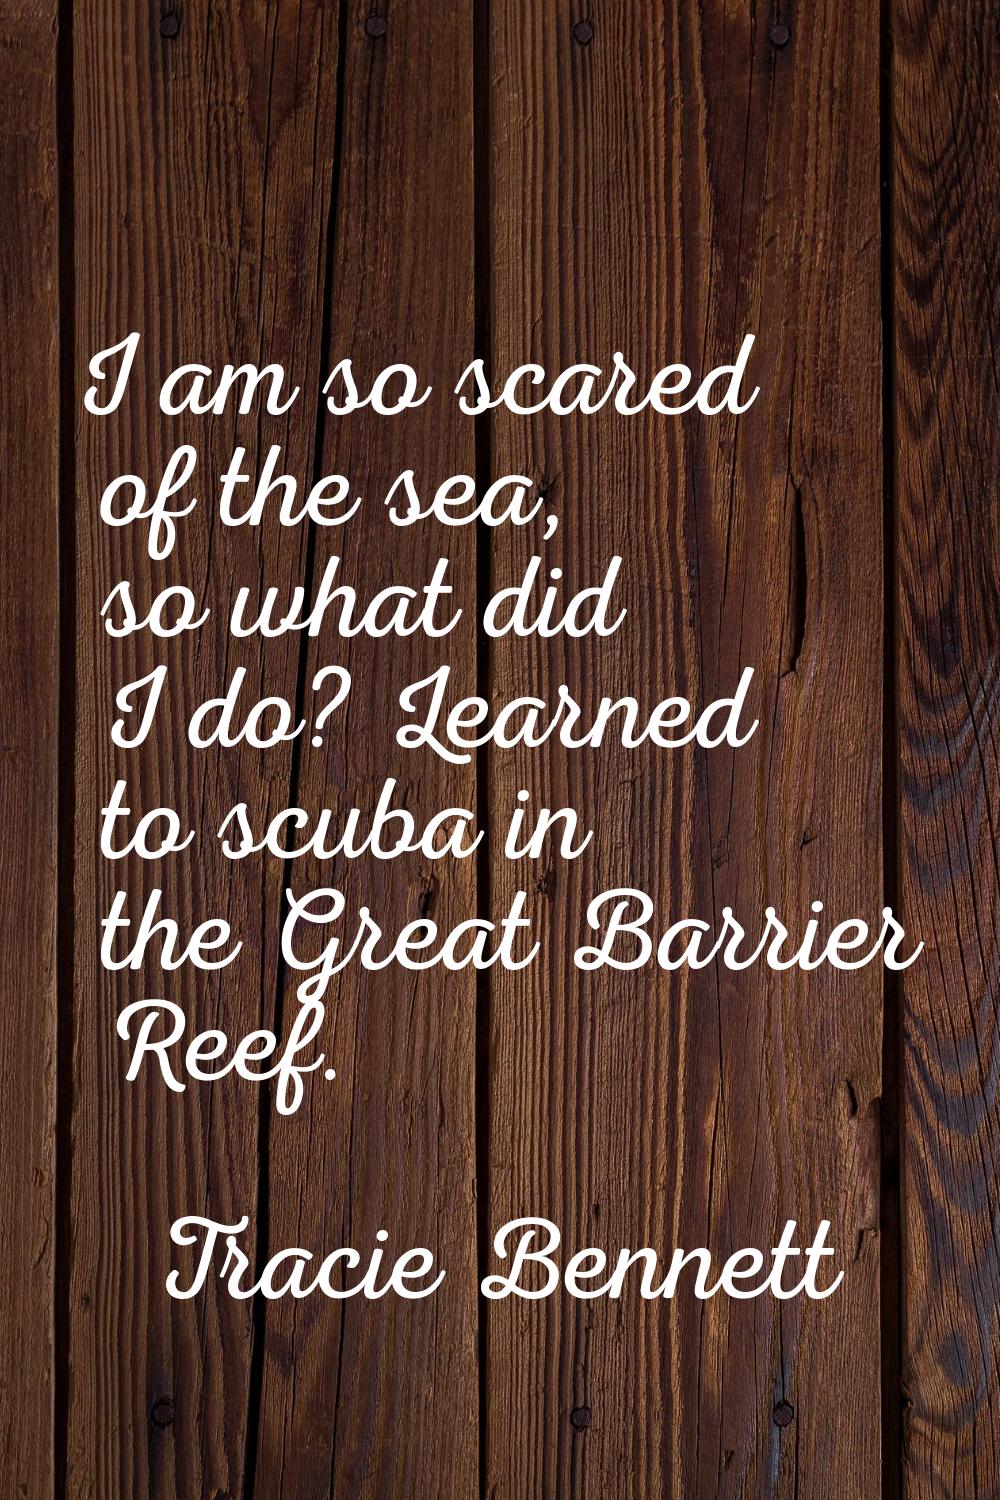 I am so scared of the sea, so what did I do? Learned to scuba in the Great Barrier Reef.